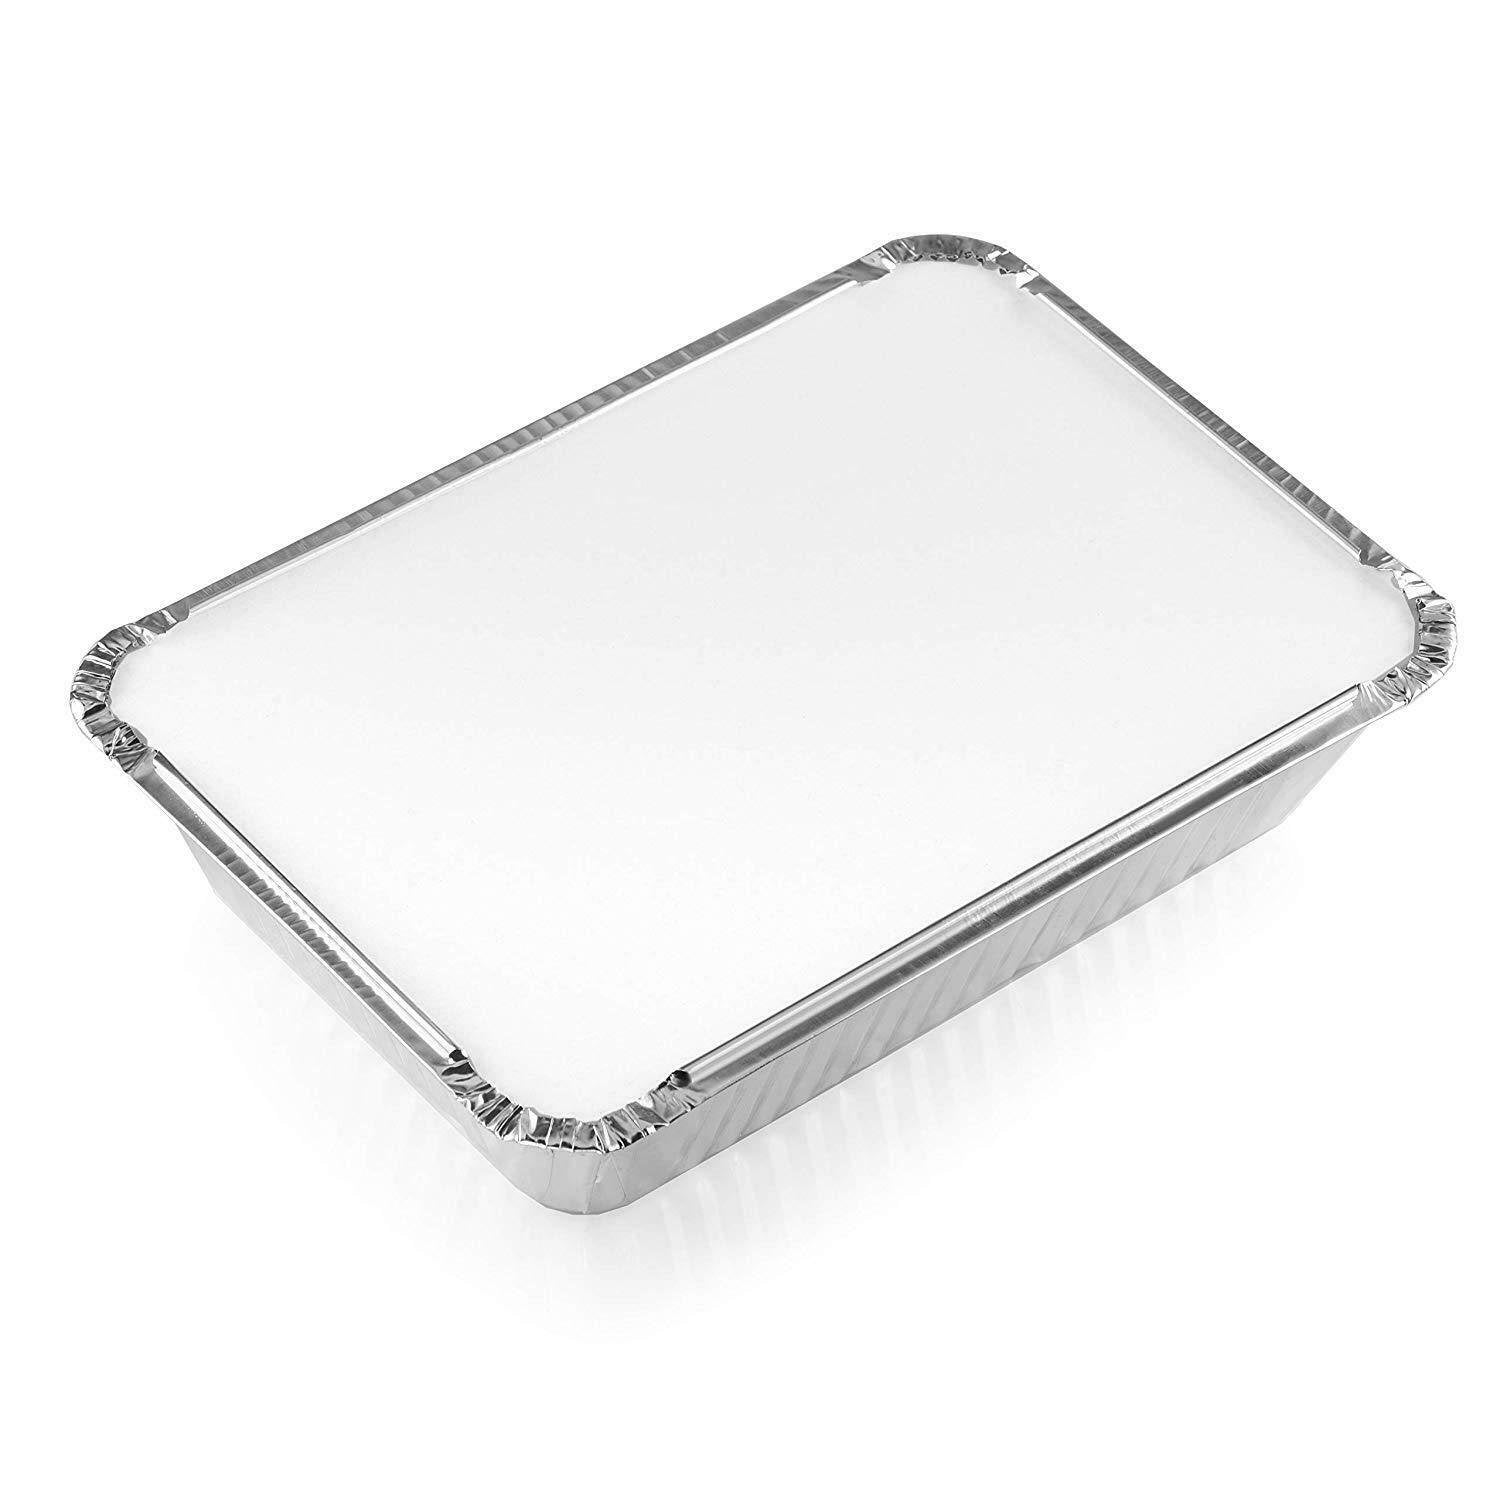 2.25lb Oblong Aluminum Pan with Board Lids Take Out Containers